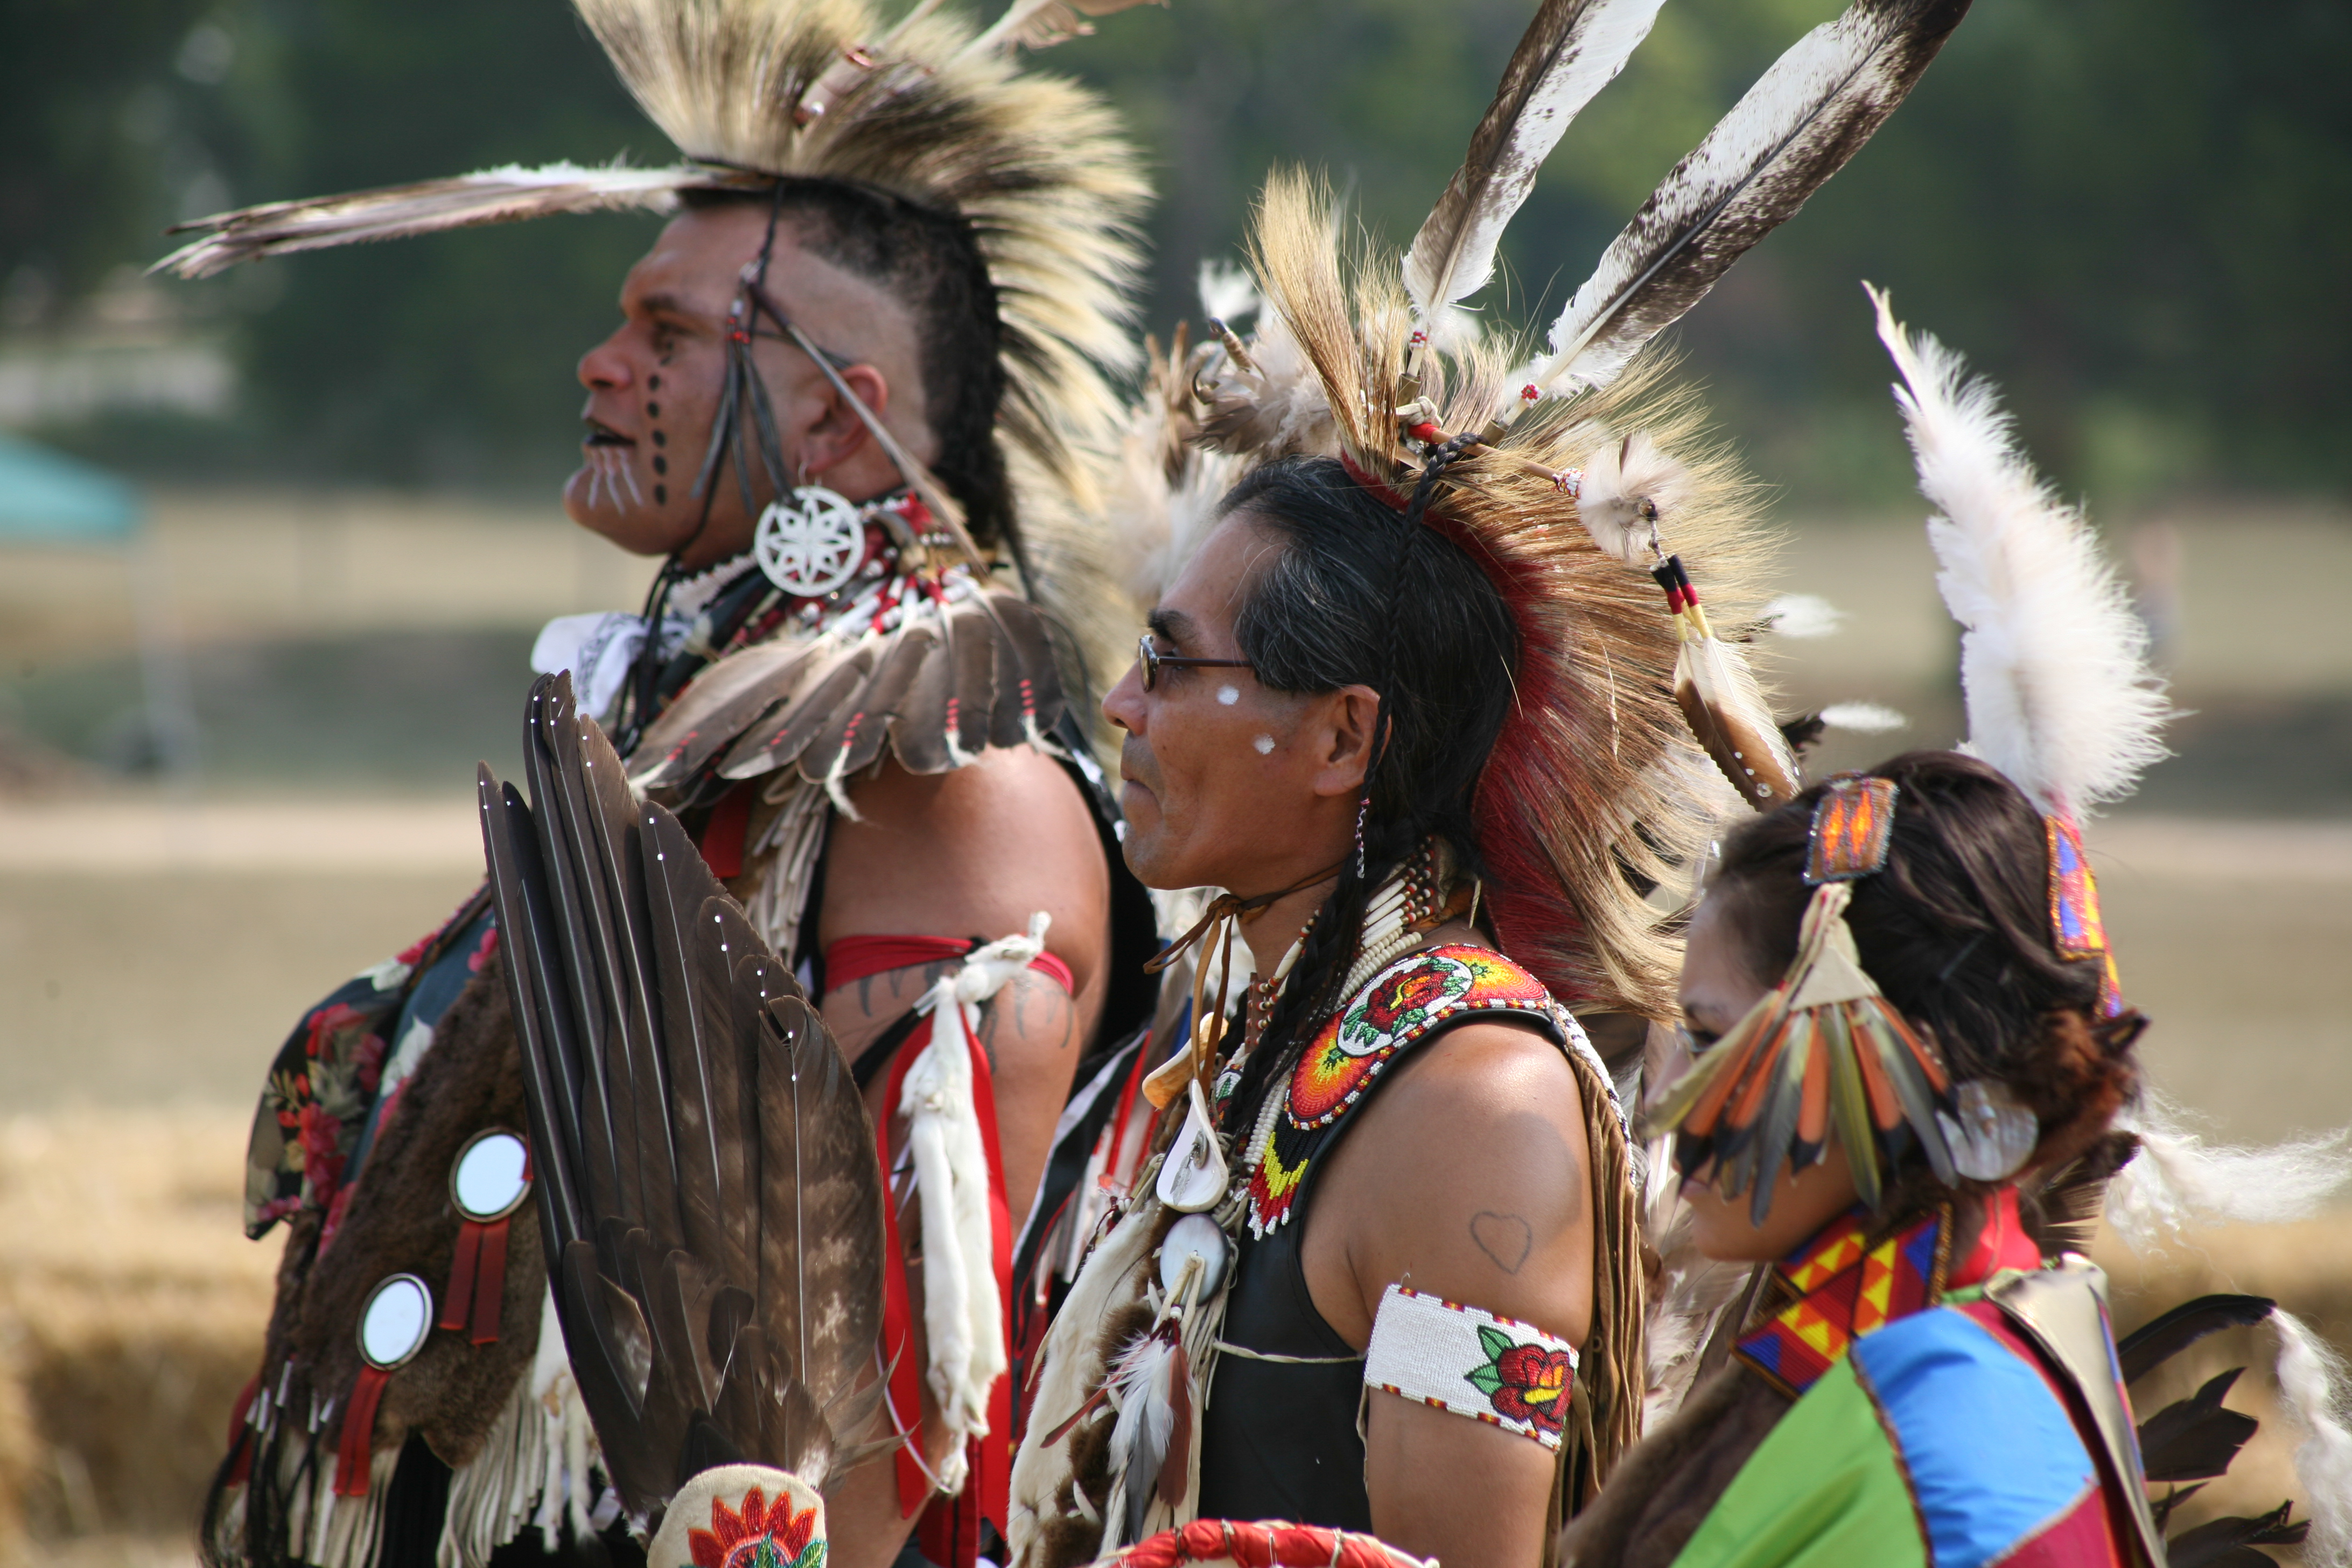 native american tribes people